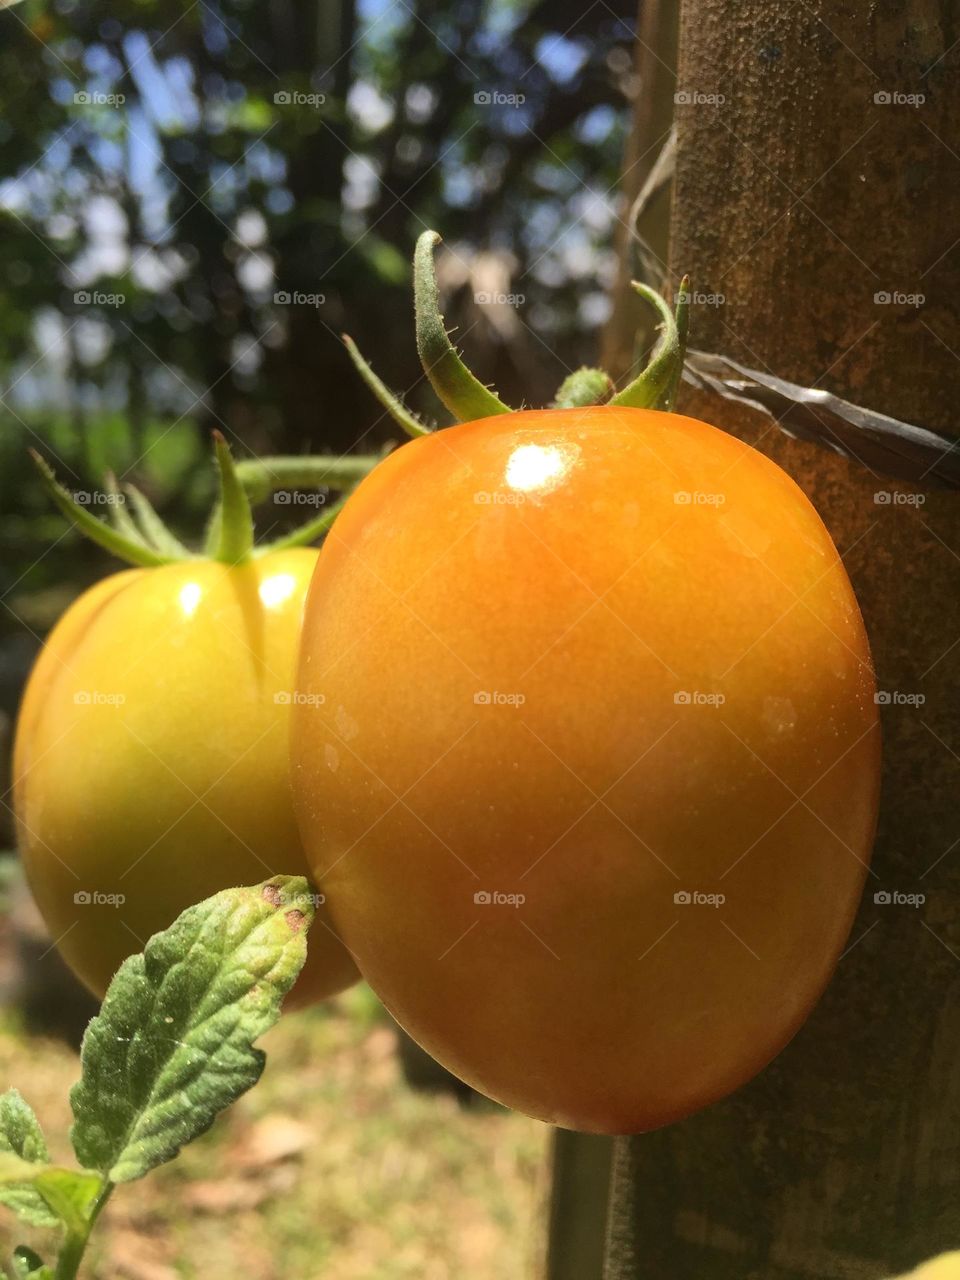 The organic Ripe Tomato from our small garden